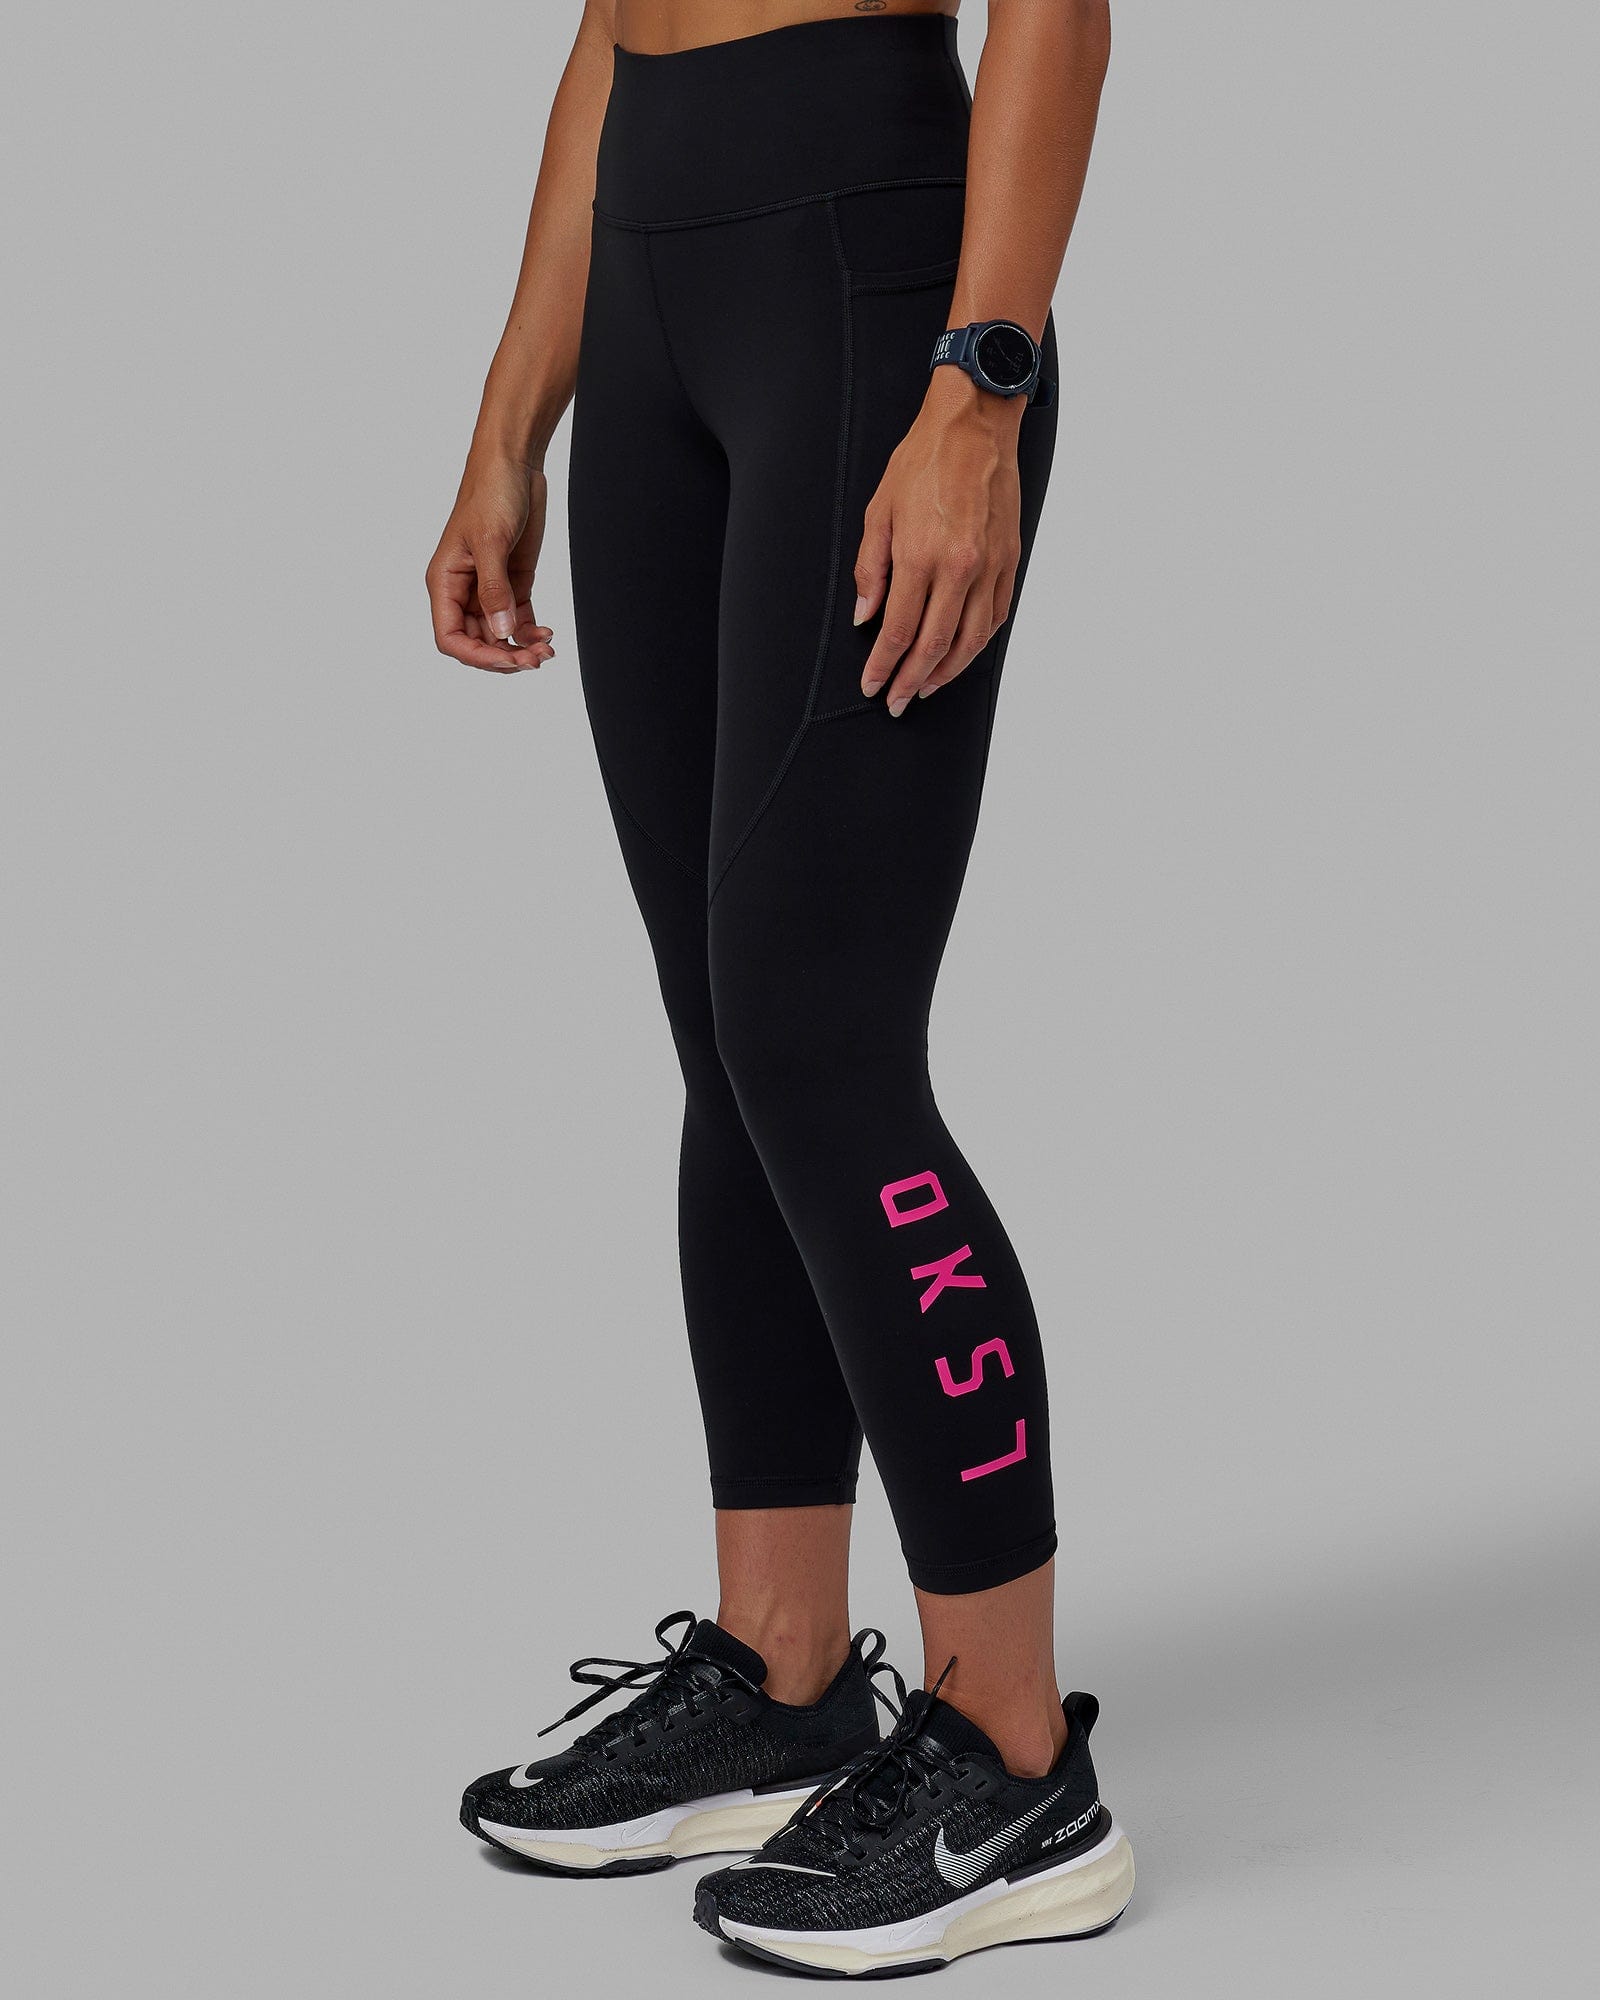 Rep 7/8 Length Tights - Ultra Pink-White